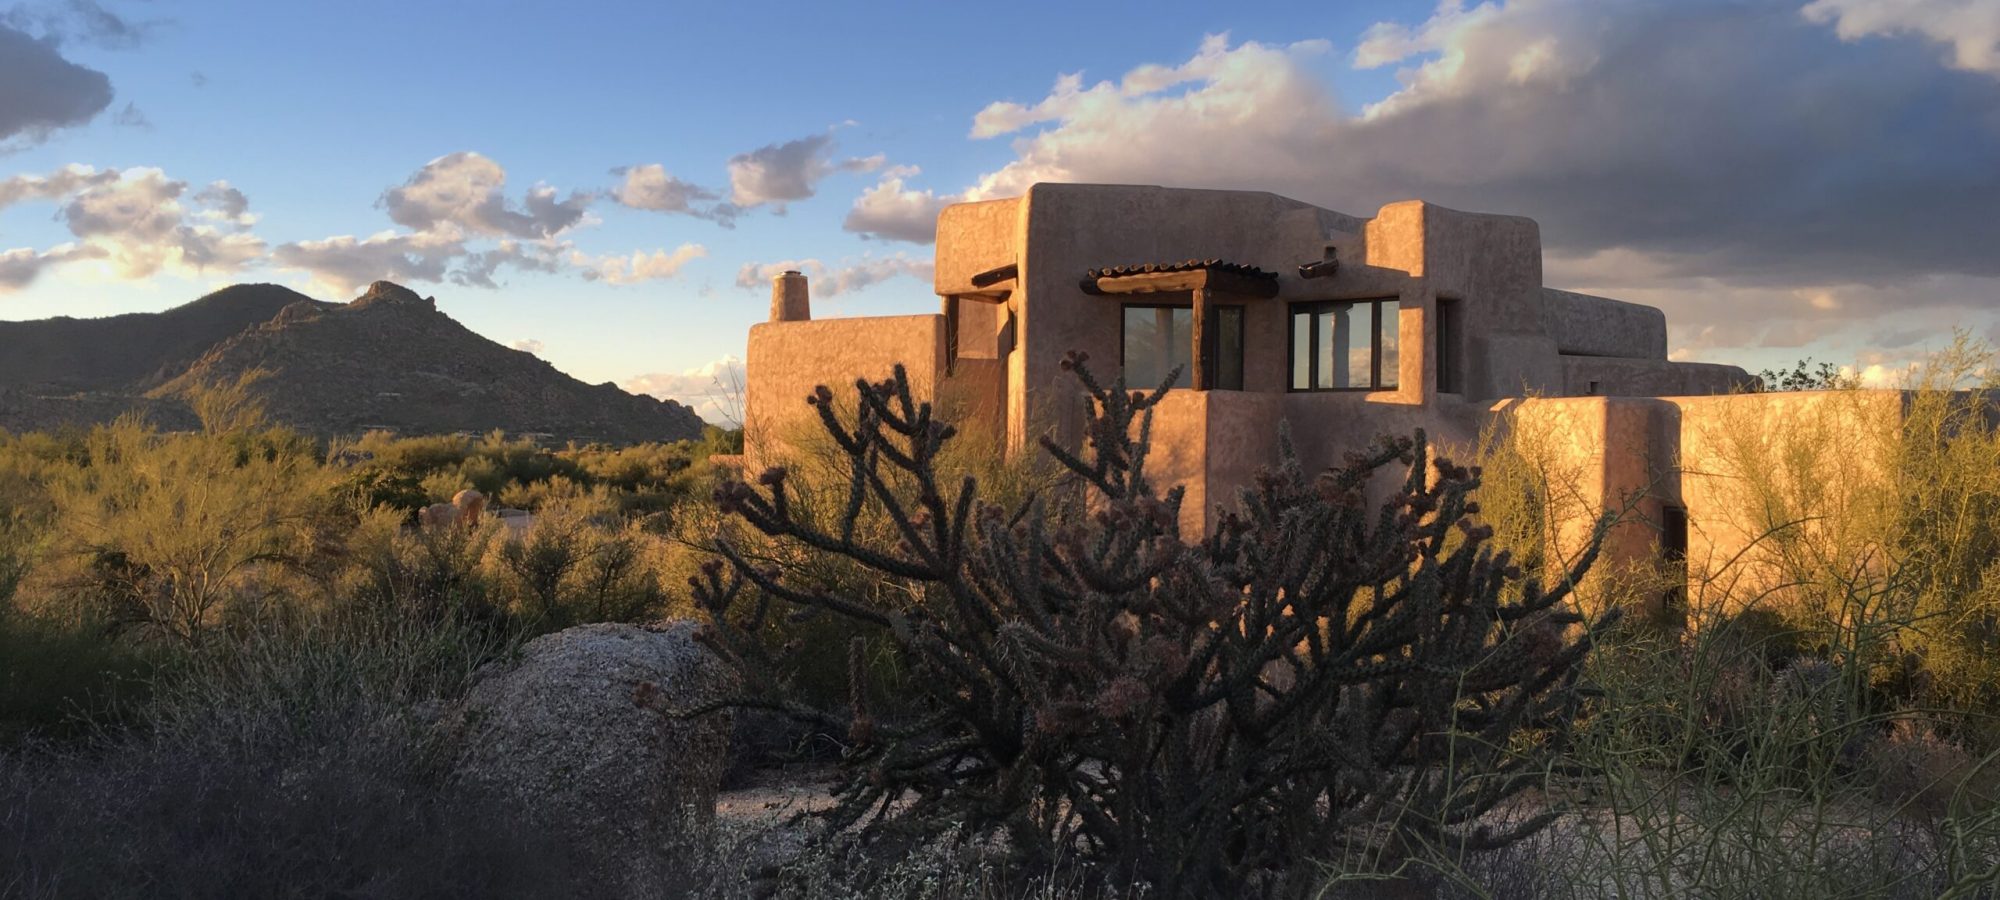 a rammed earth home in the desert